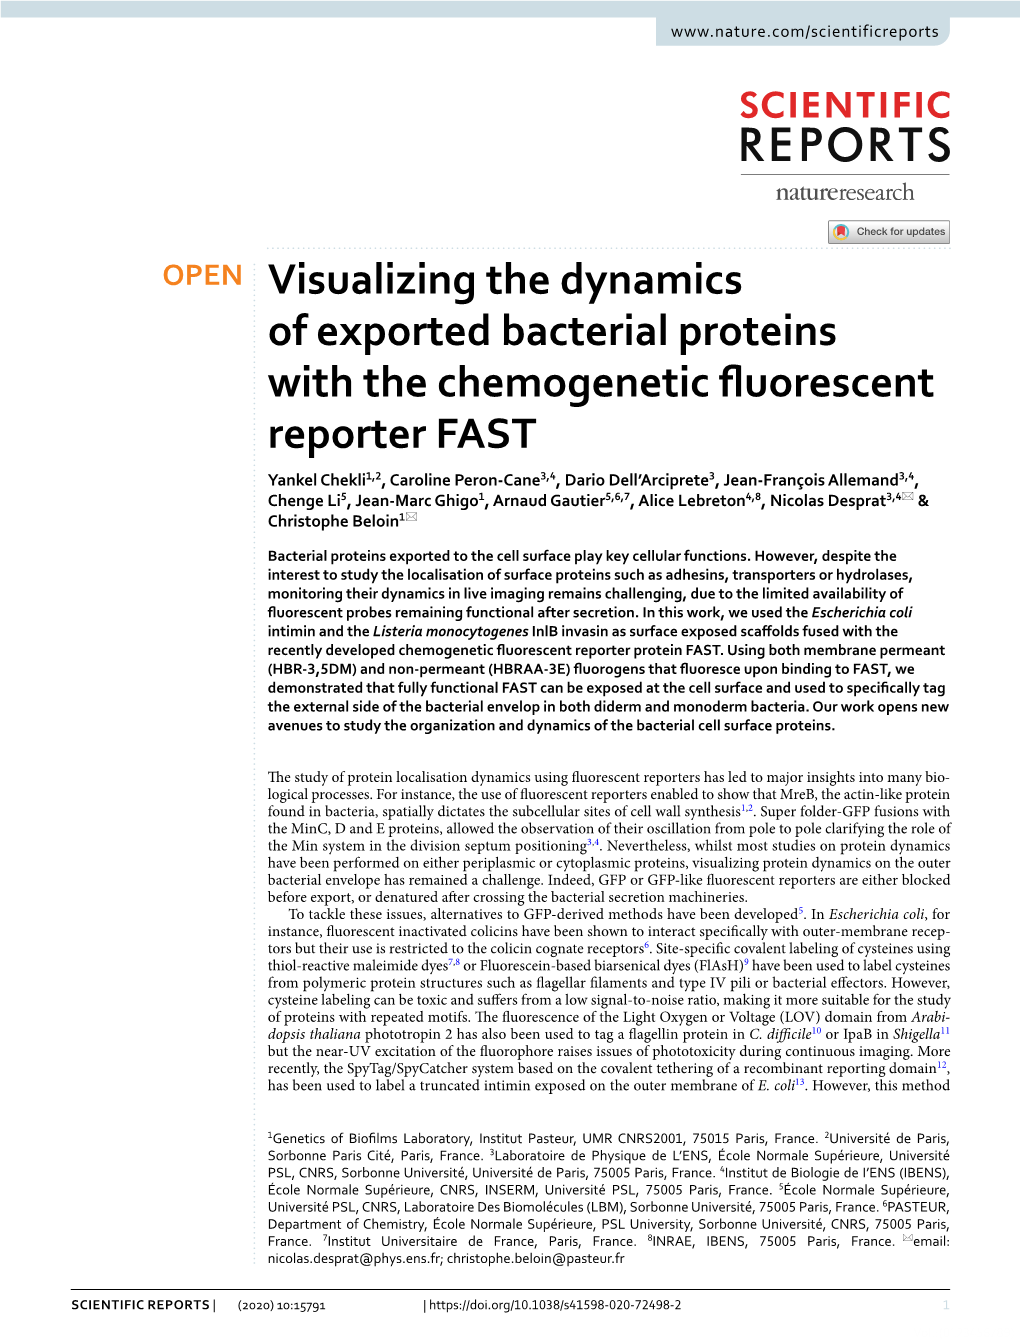 Visualizing the Dynamics of Exported Bacterial Proteins with The